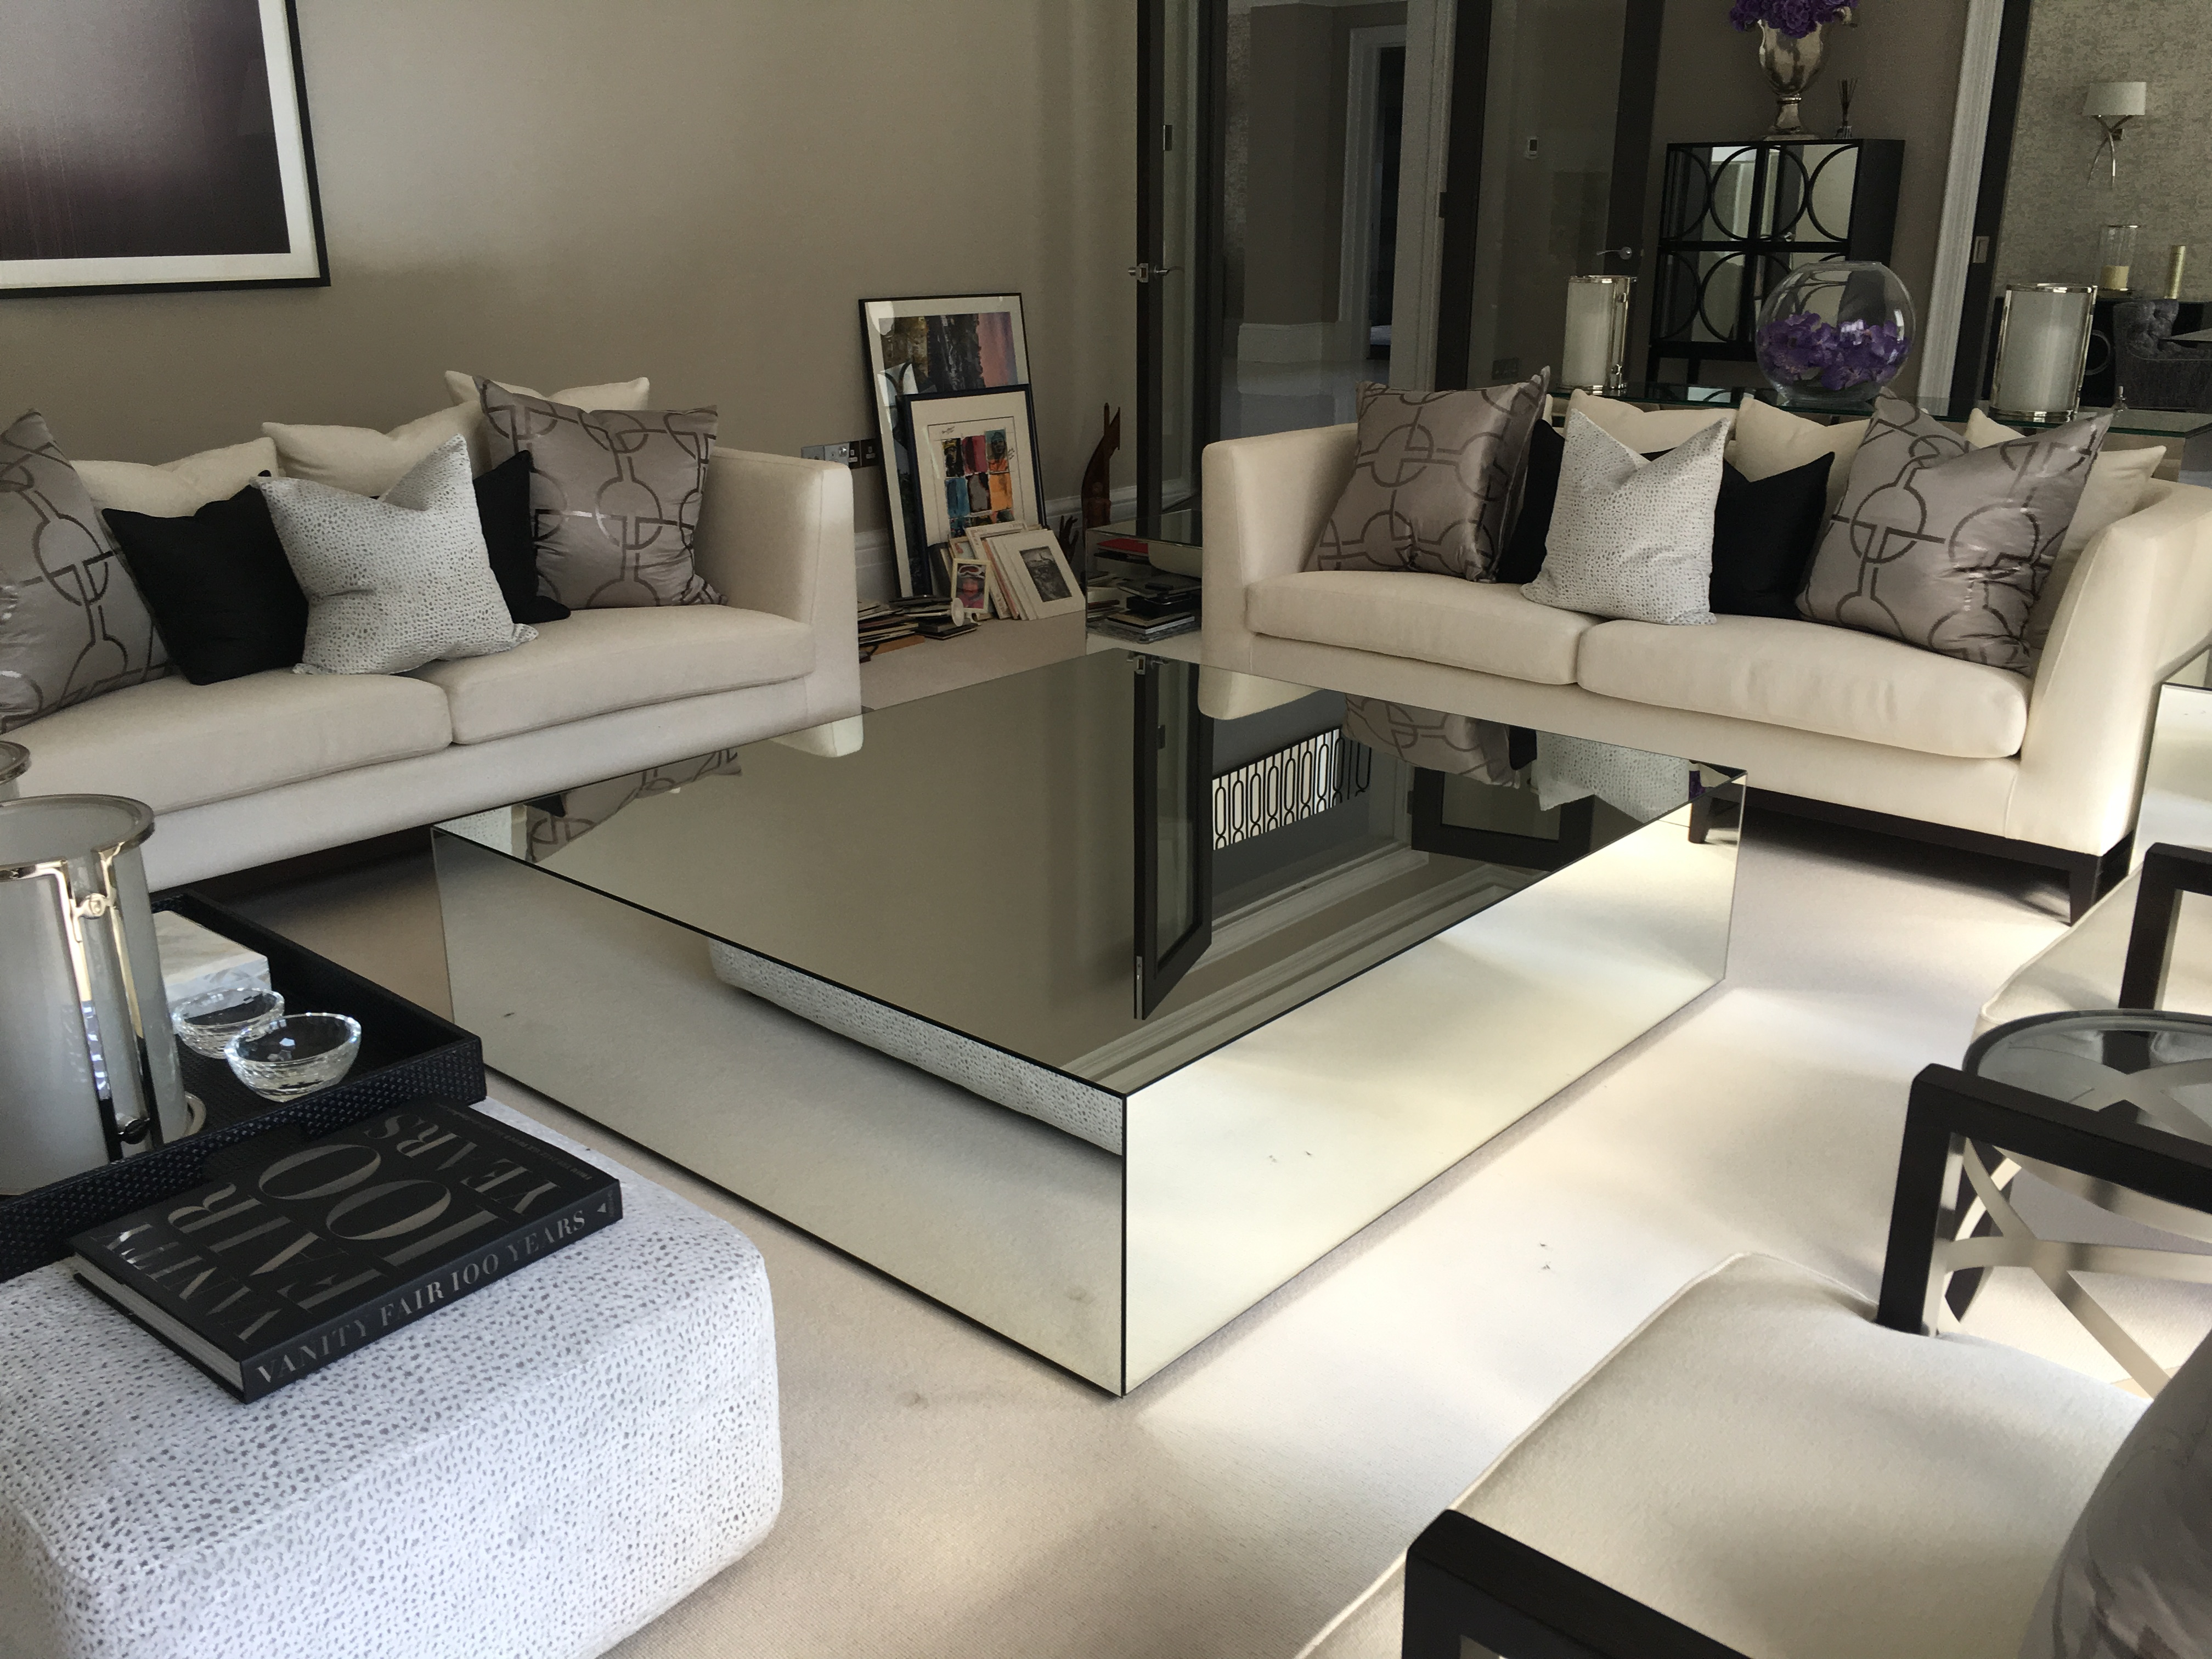 Mirrored Coffee Tables Klarity Glass Furniture throughout sizing 4032 X 3024